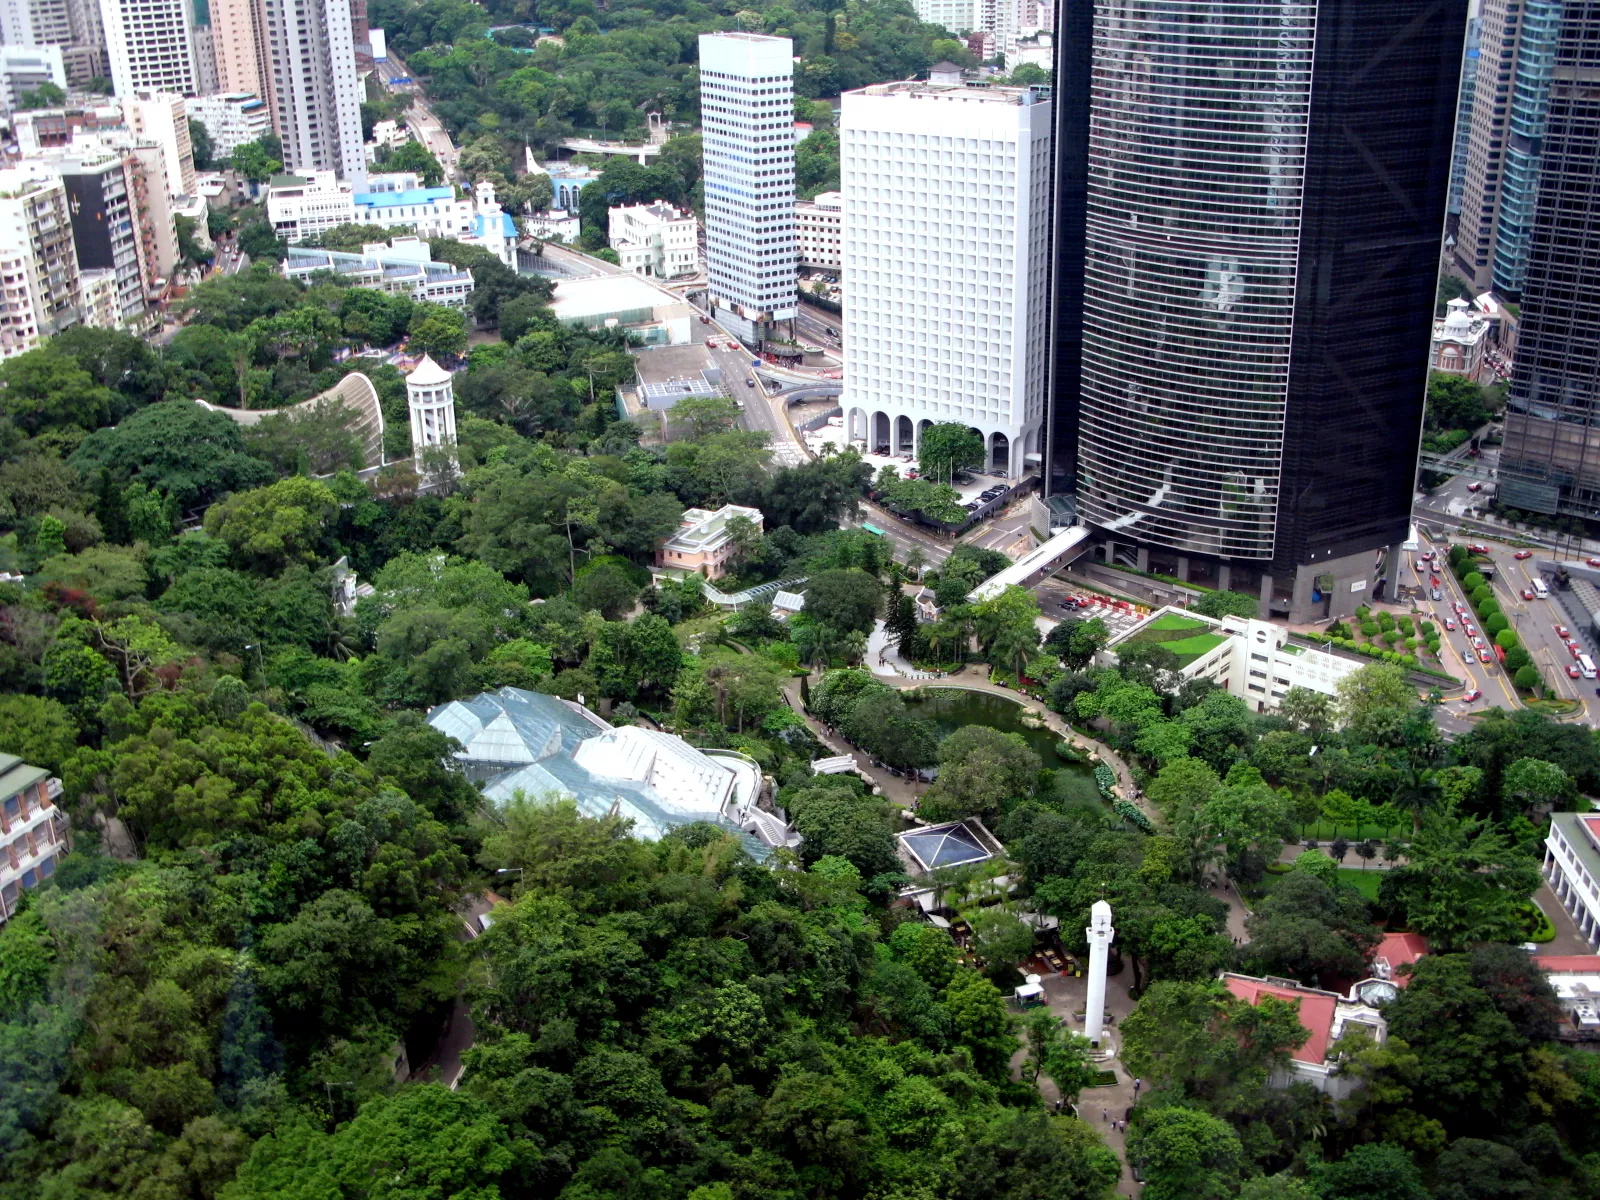 Hong Kong Park in China, East Asia | Parks - Rated 3.6